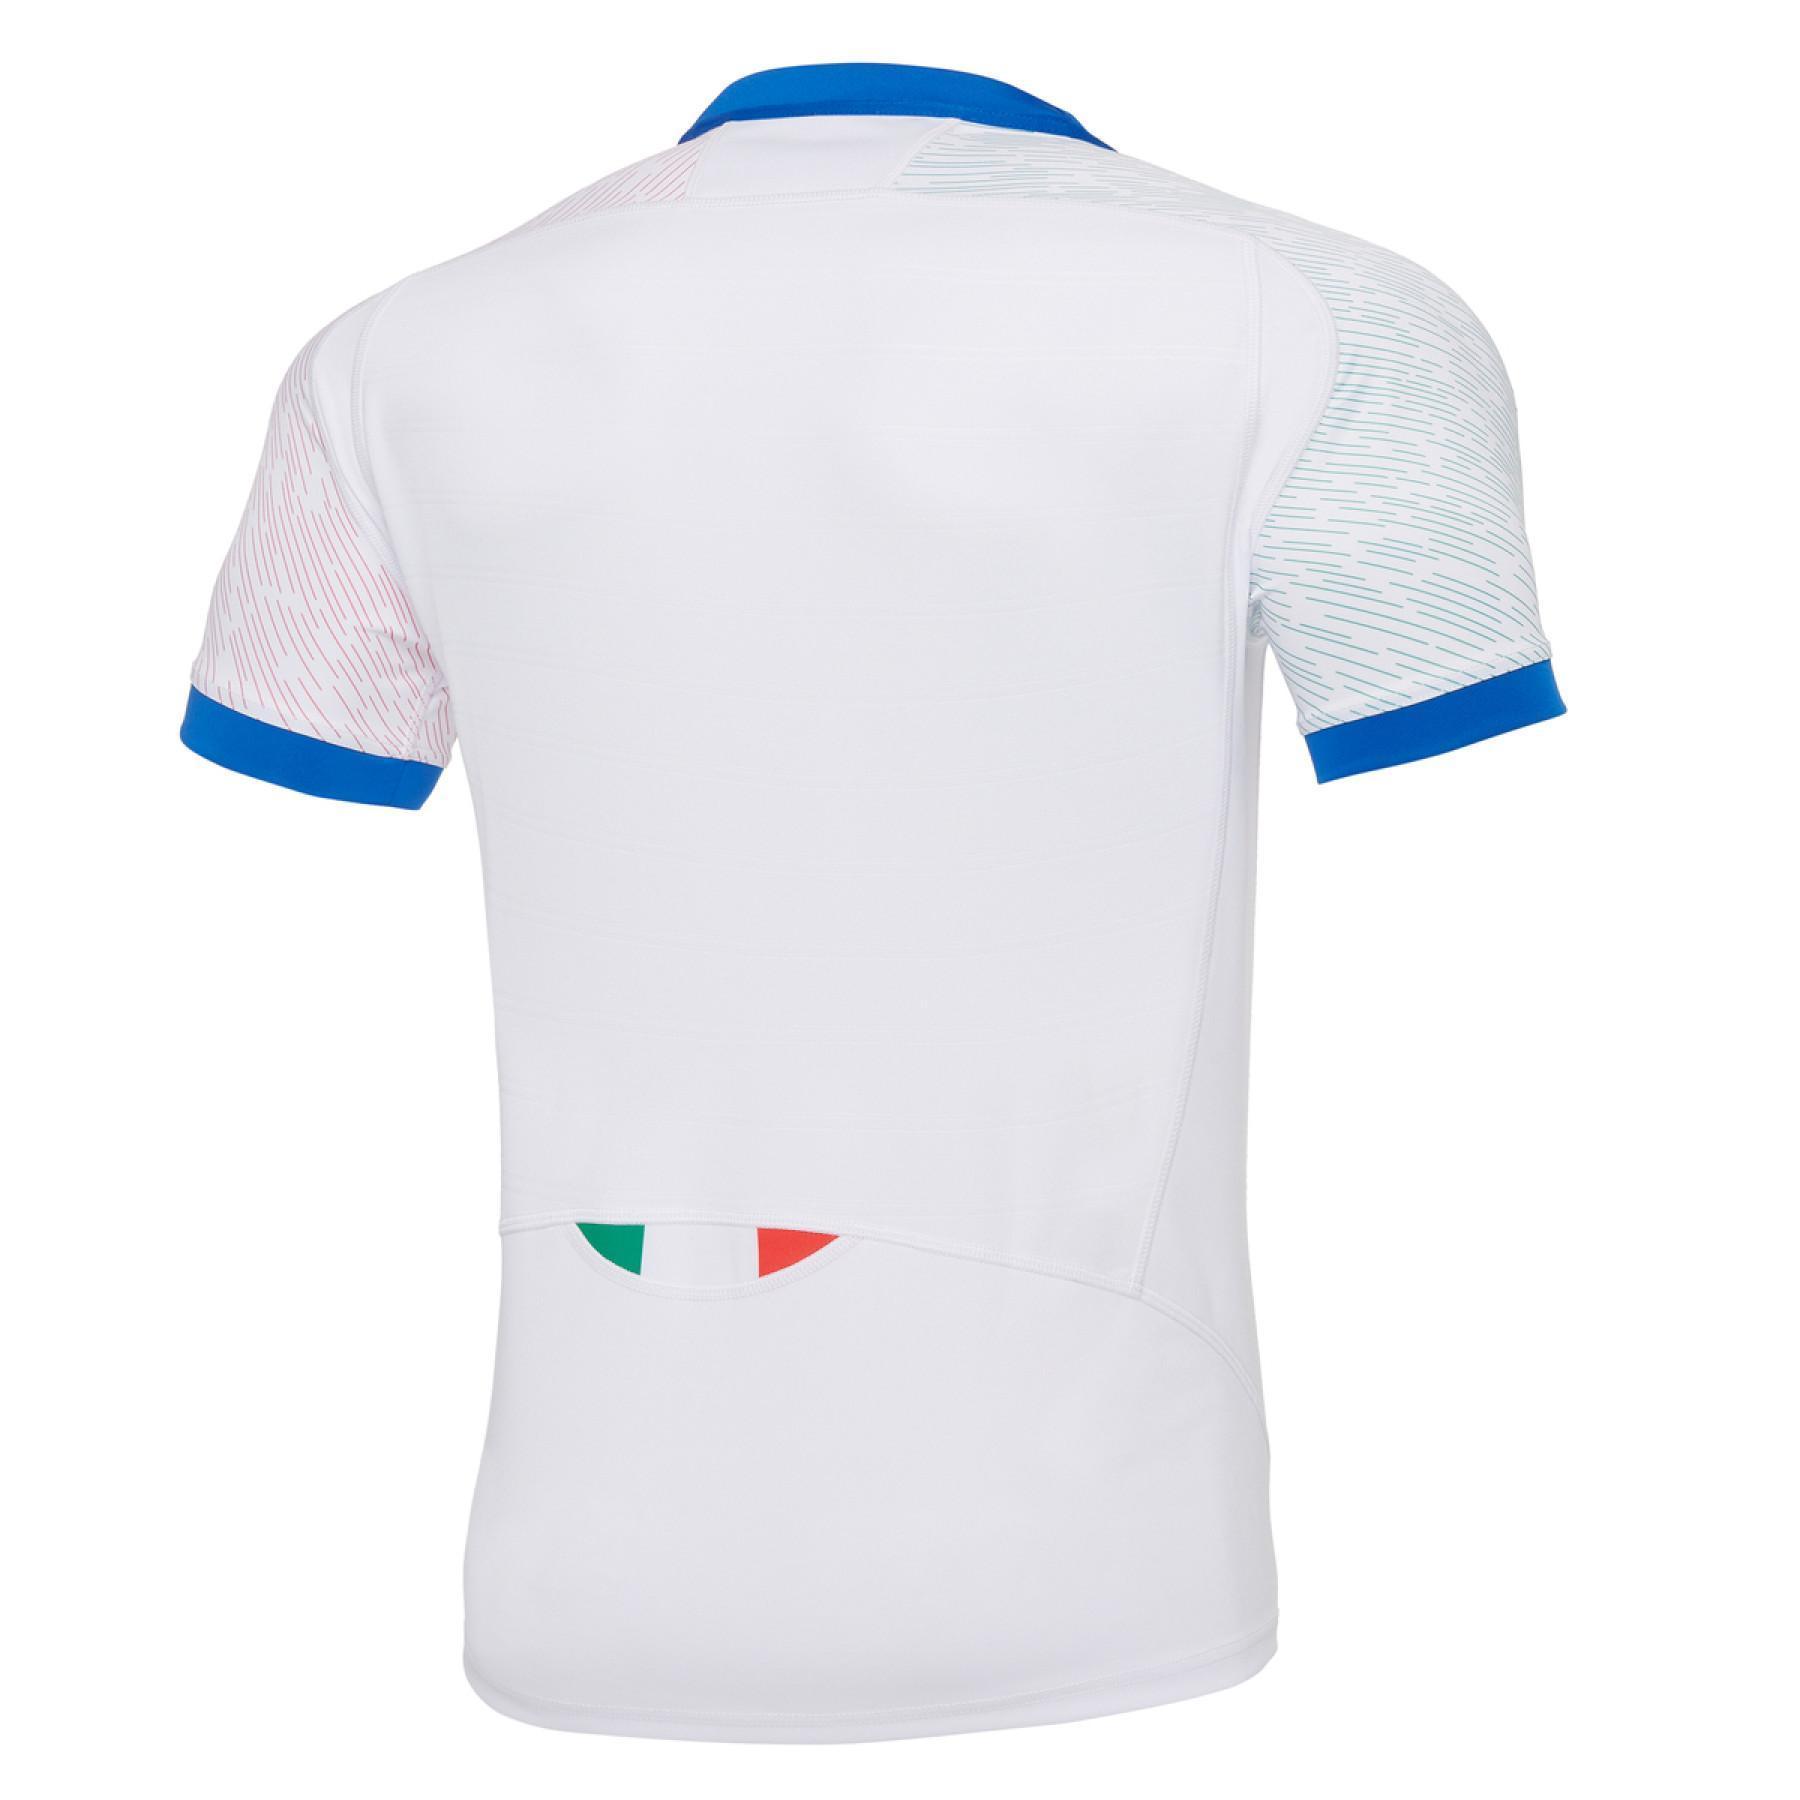 Outdoor jersey Italie rugby 2020/21